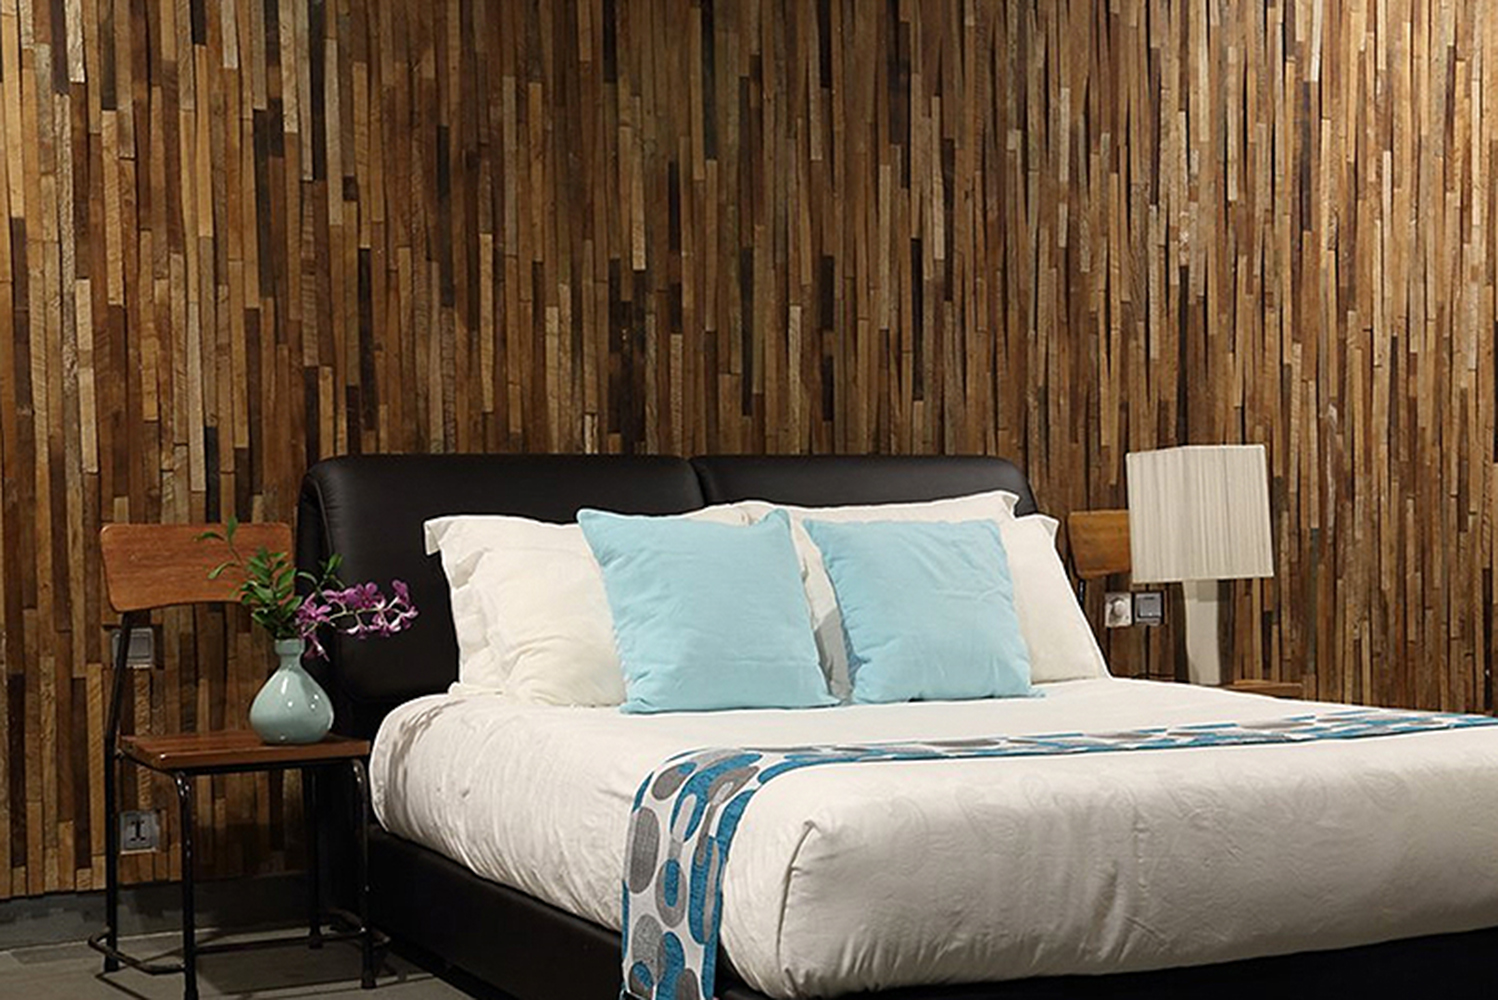 Kayu V-wood wall cladding is a meshed tile arrangement of reclaimed Indonesian teak with a tapering relief 